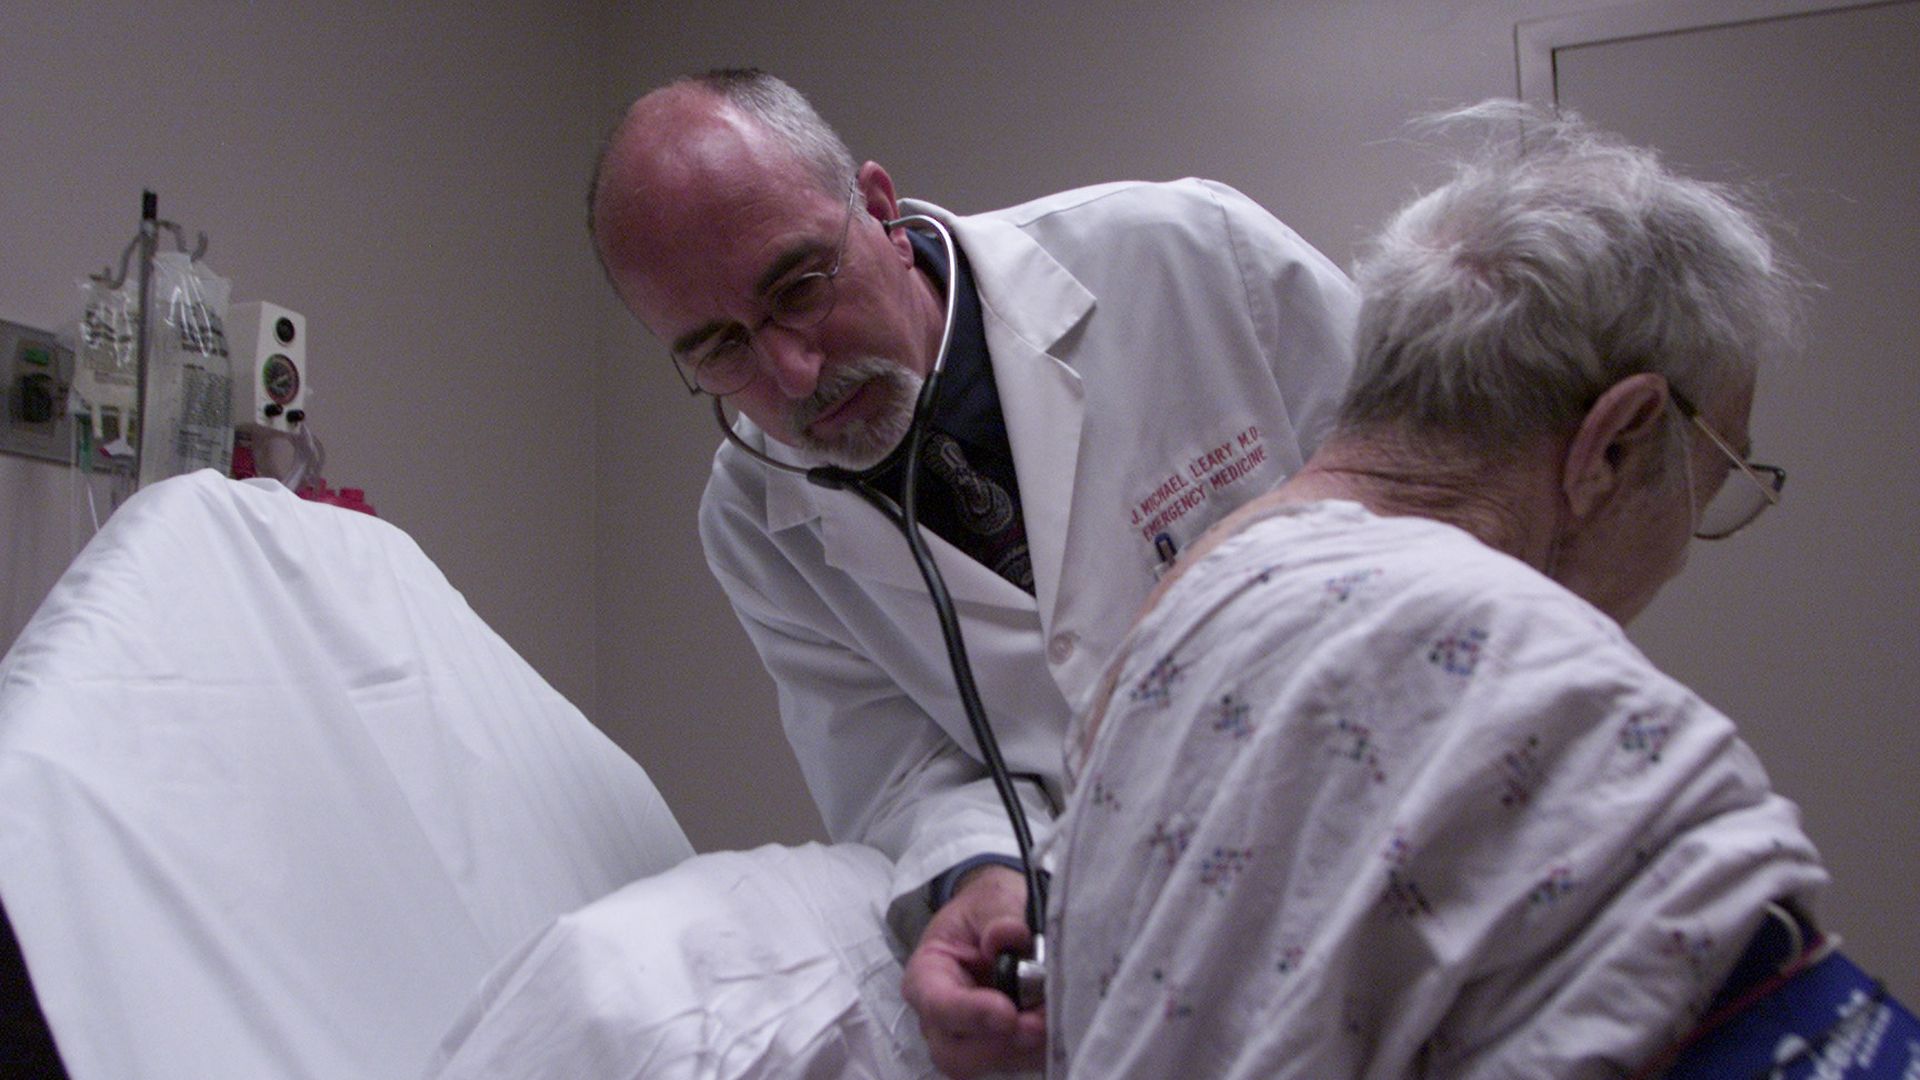 A doctor listens to an elderly patient